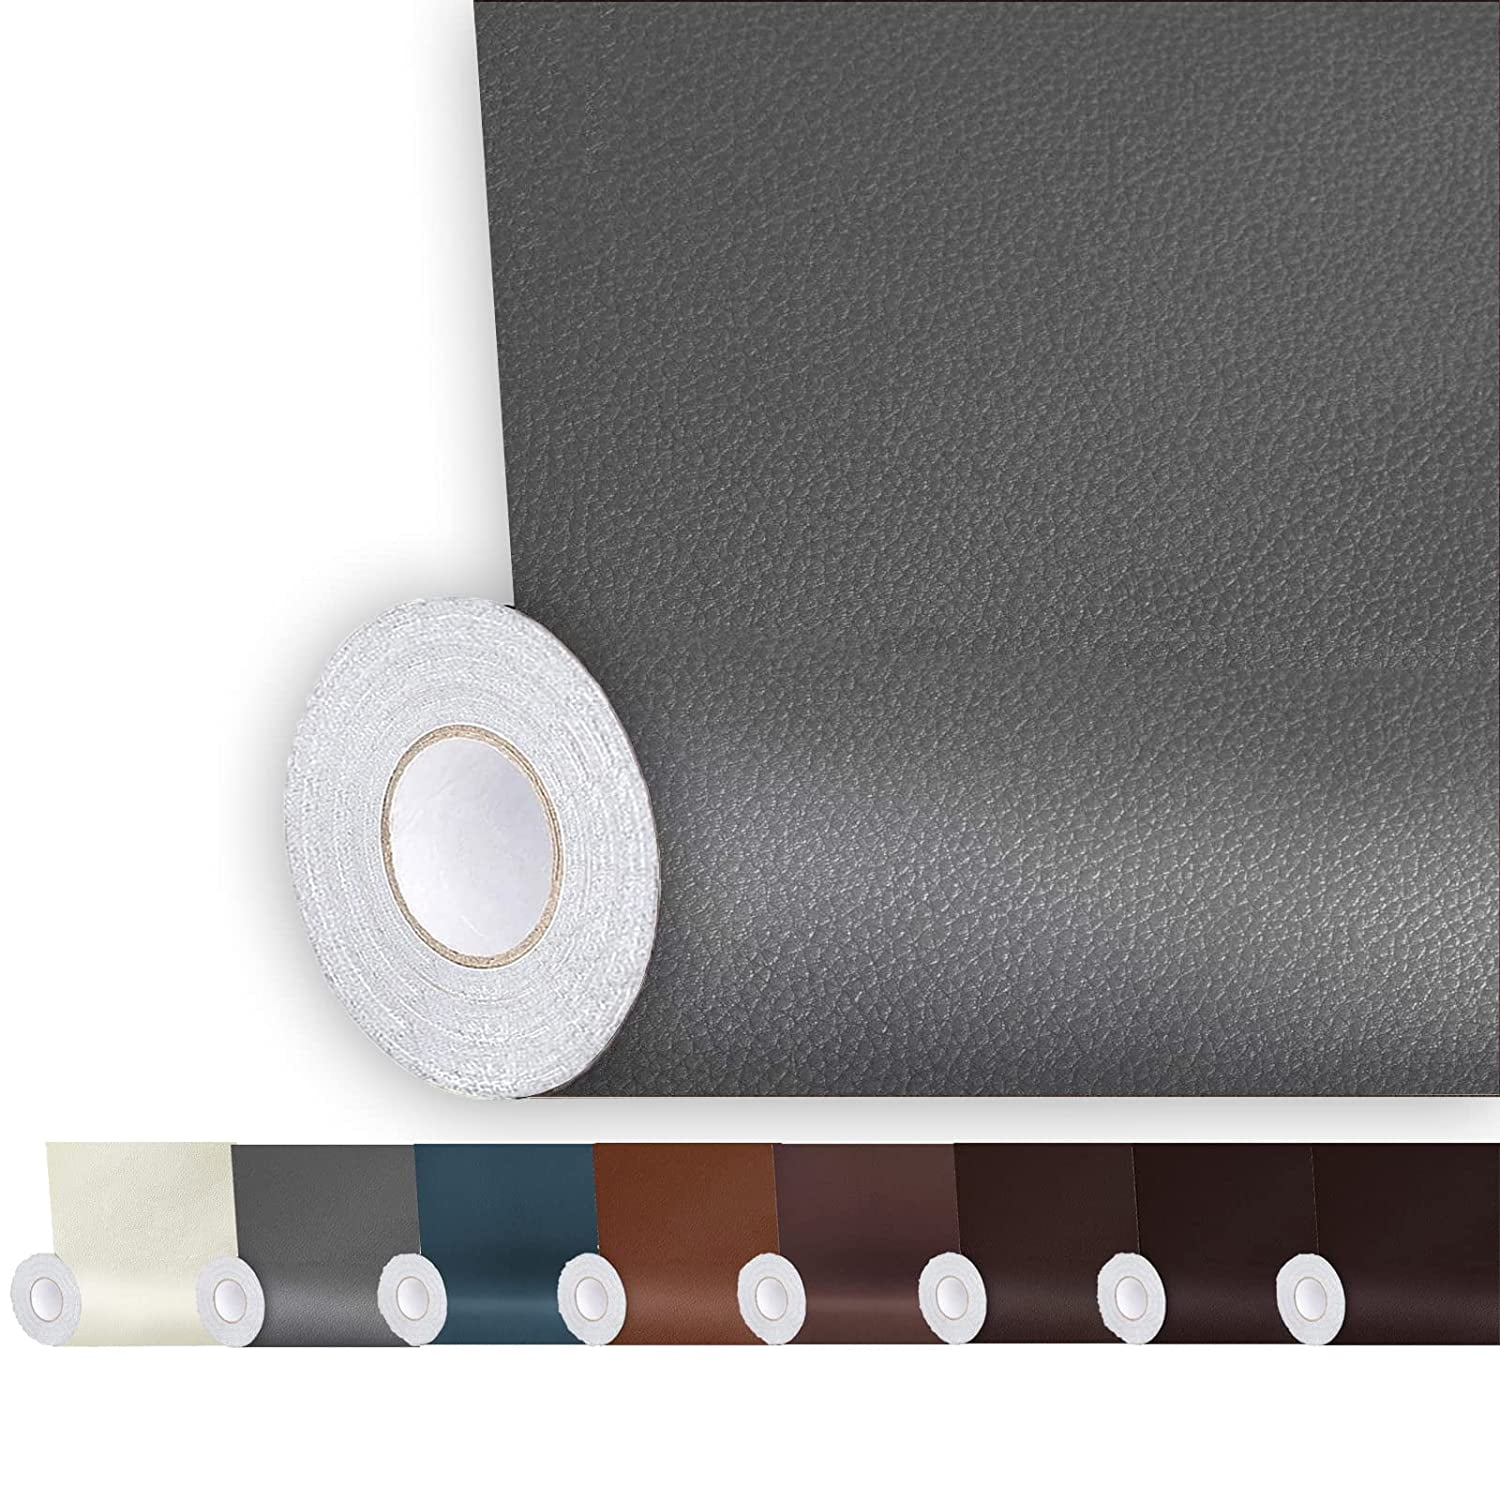 SEISSO Leather Repair Patch Set, Faux Leather Self-Adhesive 40 x 200 cm  Leather Patch Kit, Leather Patches, Leather Repair Tape for Sofas,  Handbags